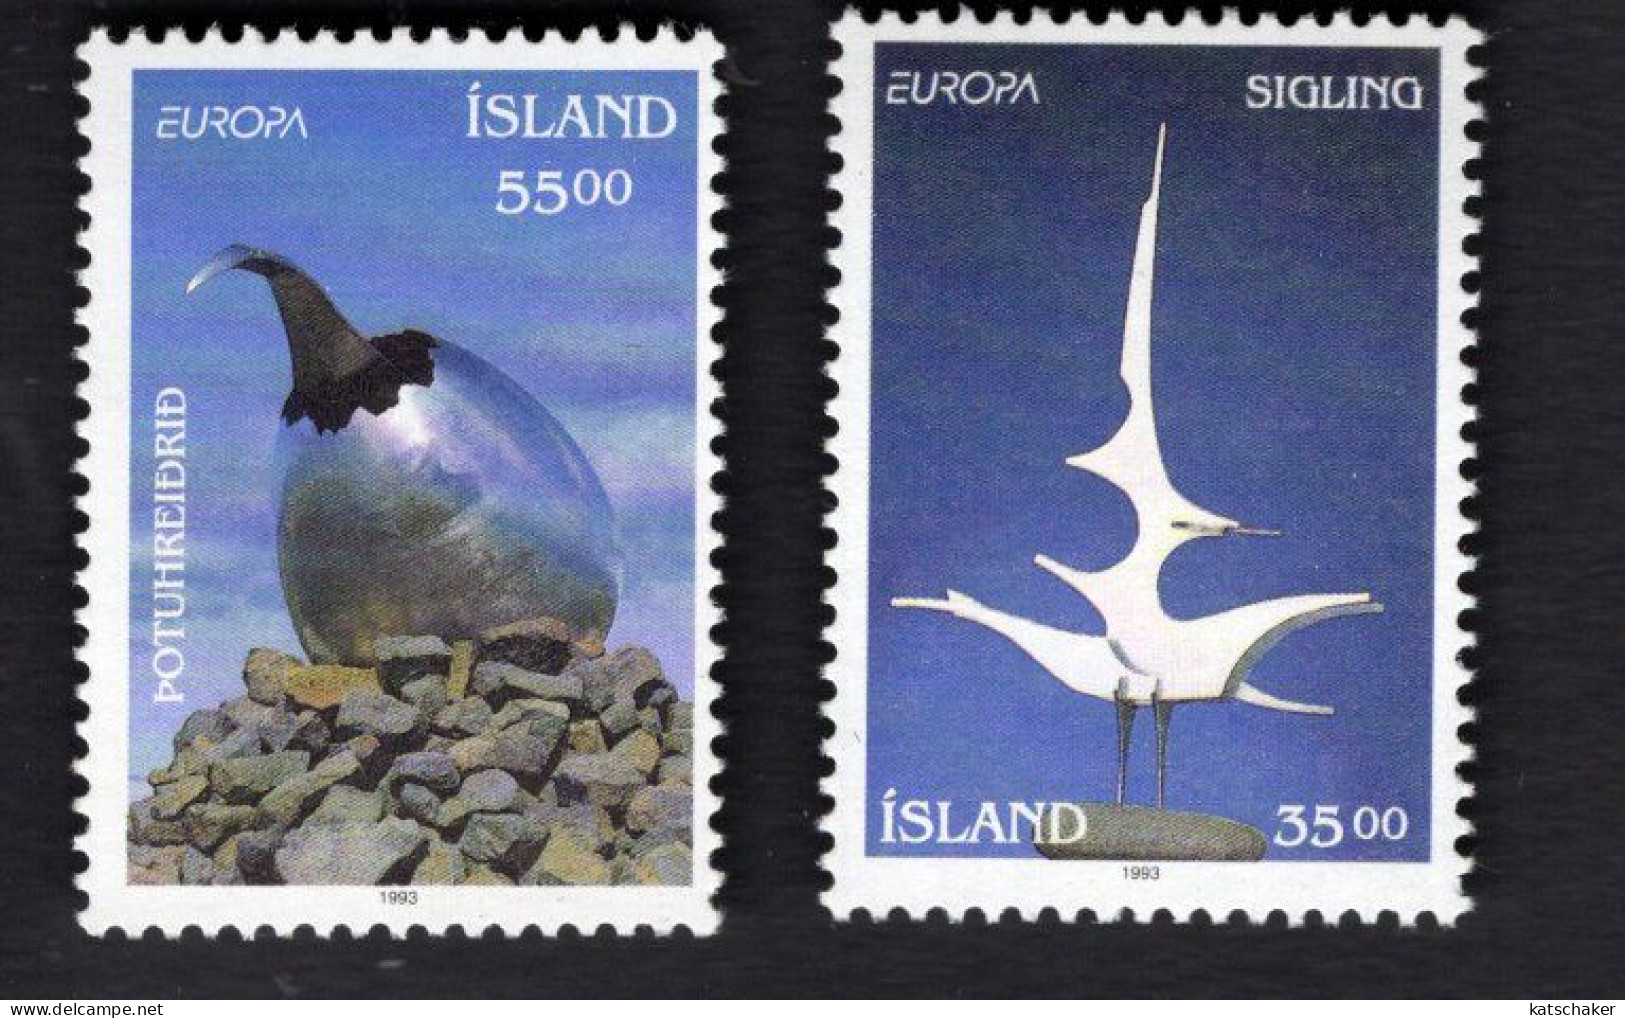 2021743271 1993 SCOTT 770 771 (XX)  POSTFRIS MINT NEVER HINGED - EUROPA ISSUE - SCULPTURES - Unused Stamps